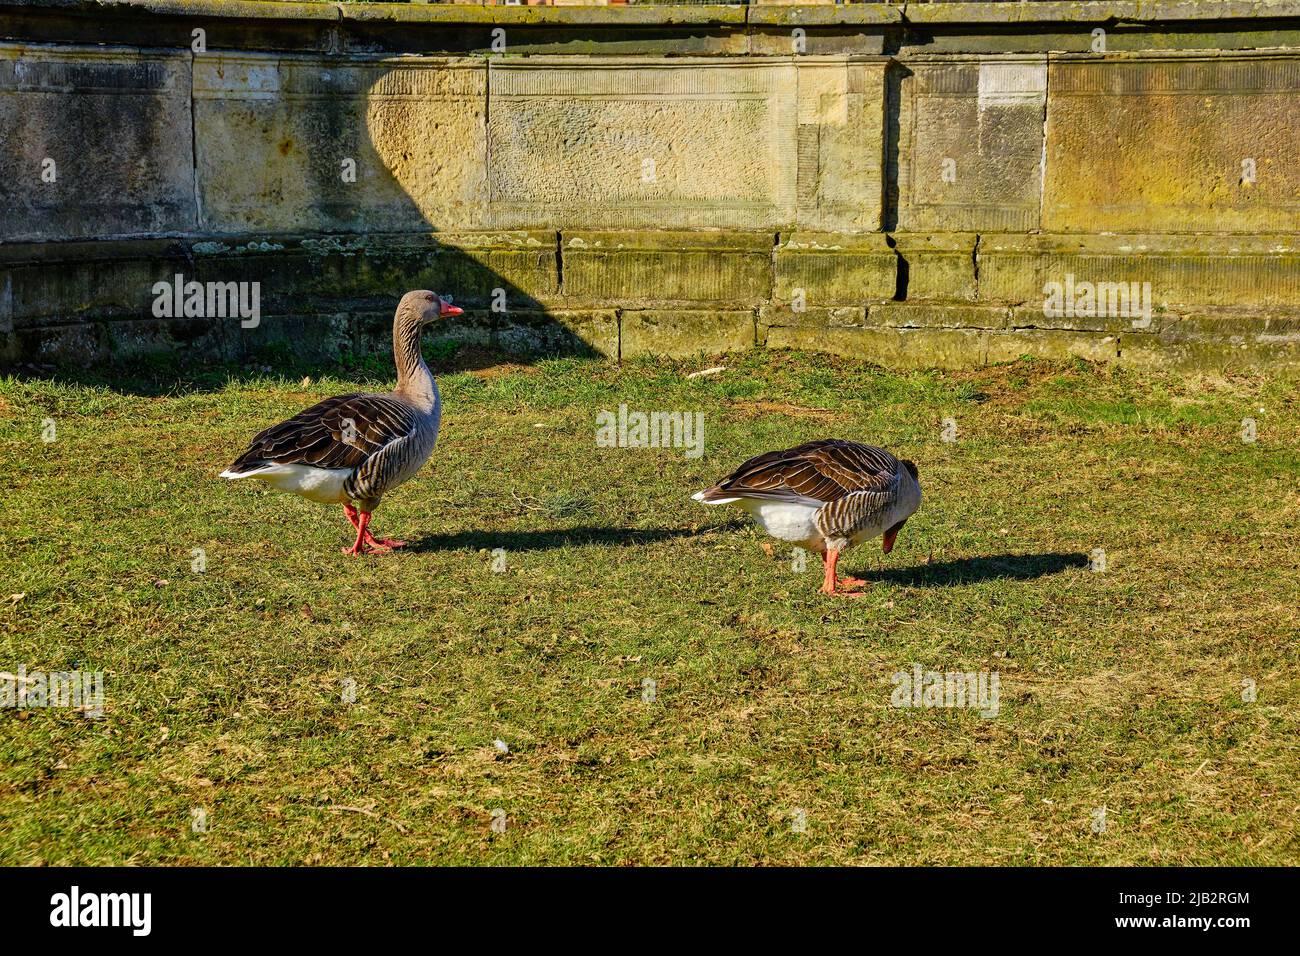 Greylag geese waddle in a meadow in front of a Baroque stone structure in search of food. Stock Photo